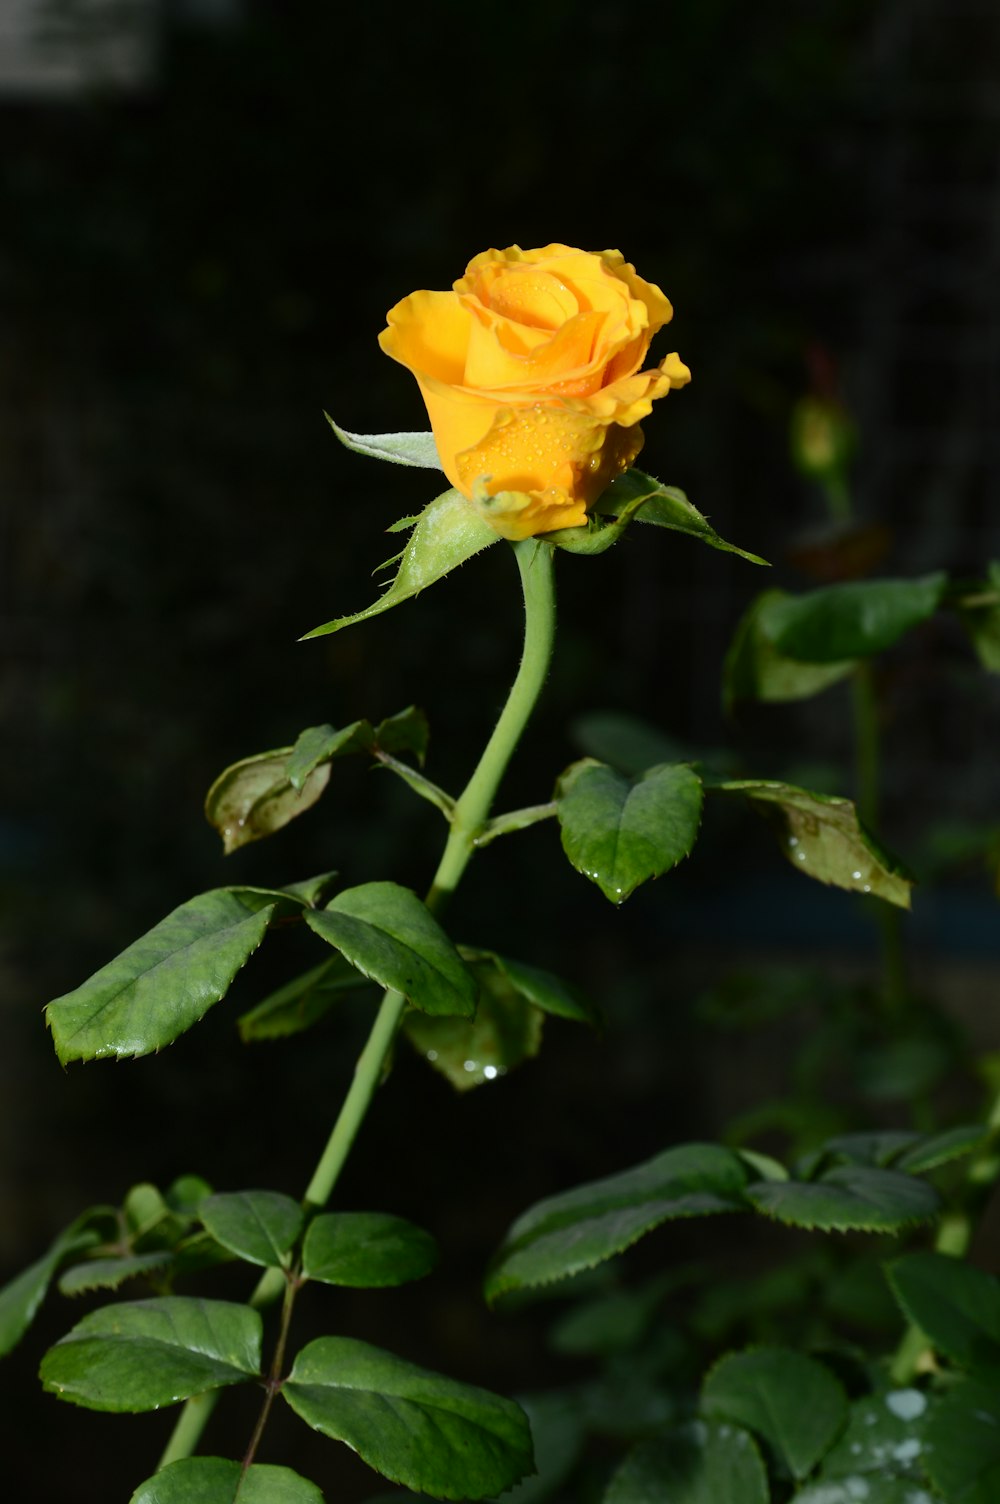 a yellow rose is blooming in a garden